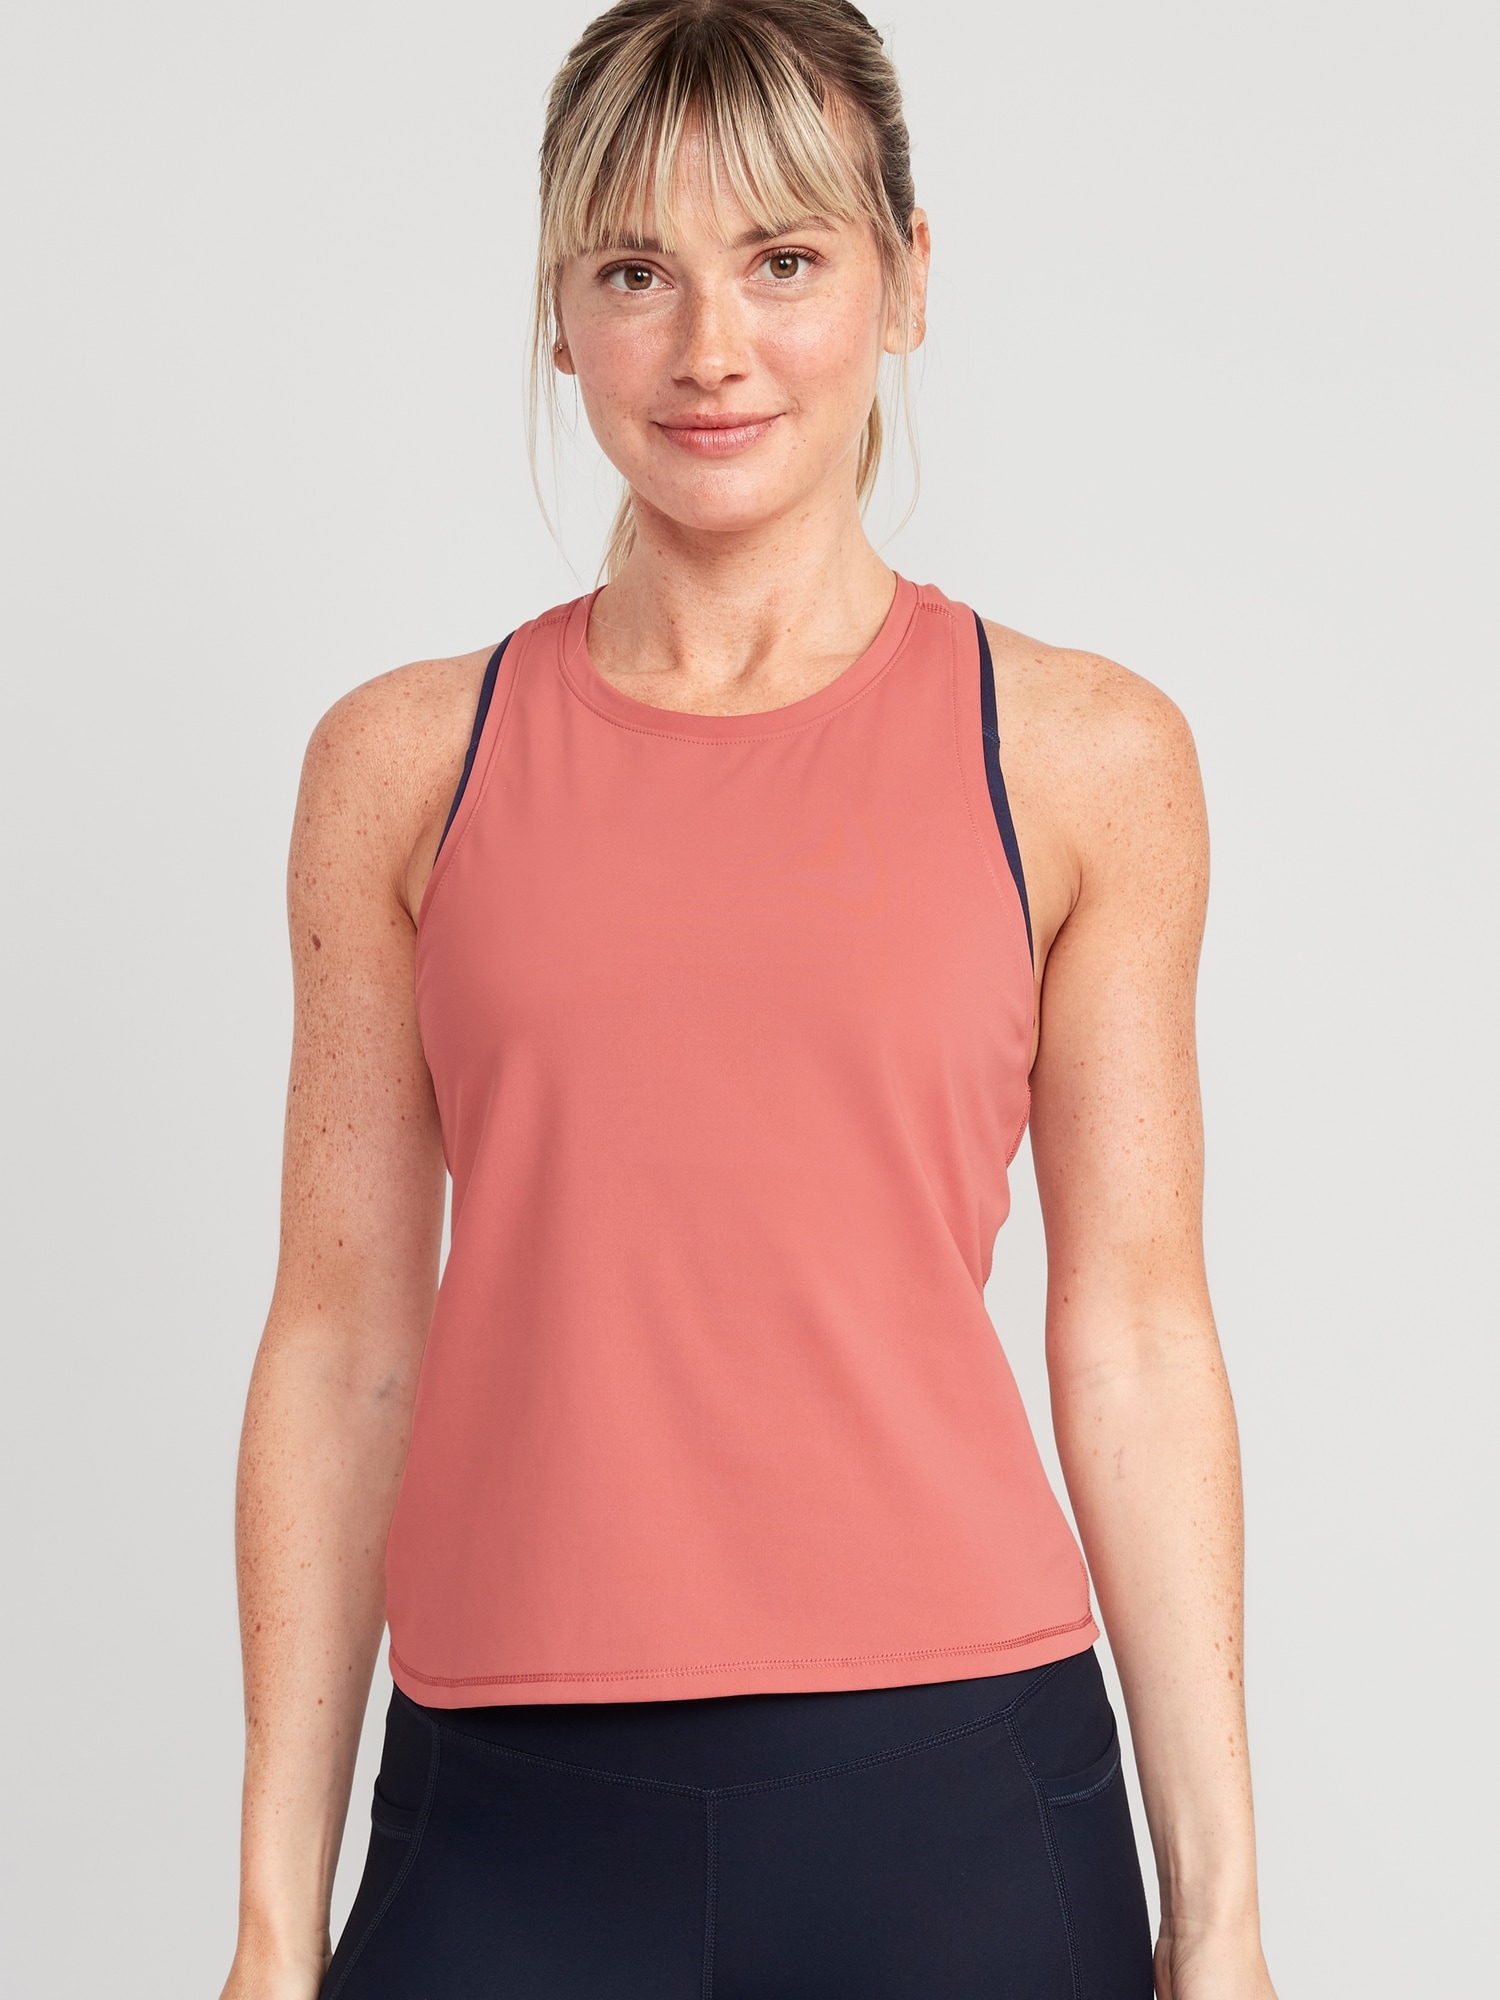 Old Navy PowerSoft Racerback Tank Top for Women pink. 1